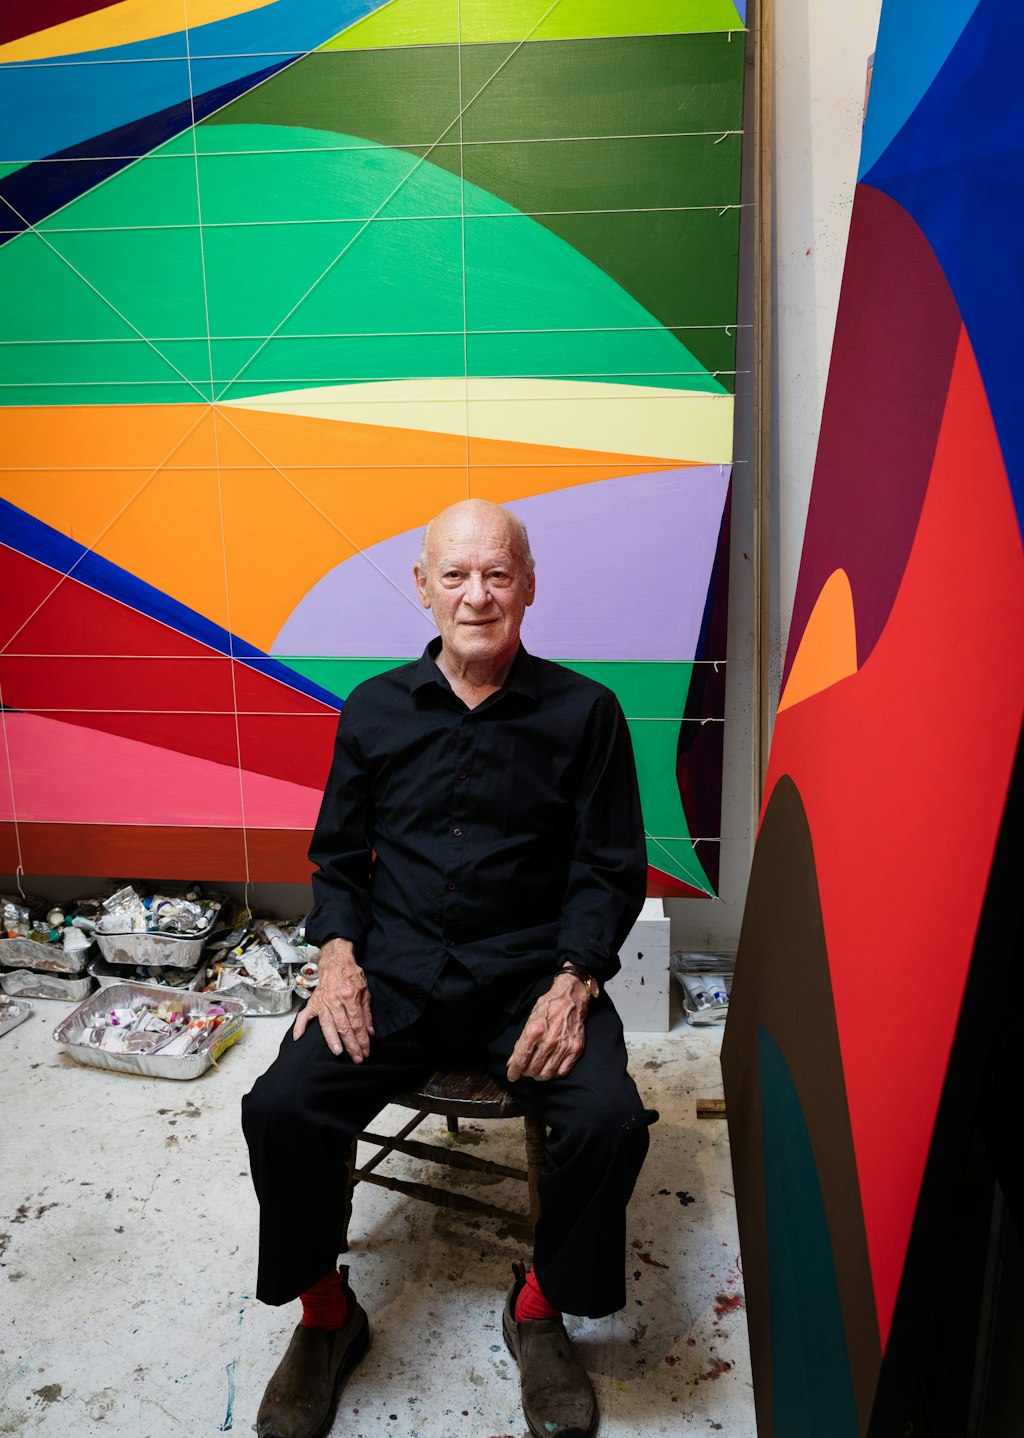 A person dressed in black sits between two large paintings of colourful abstract shapes. Art materials are on the floor.